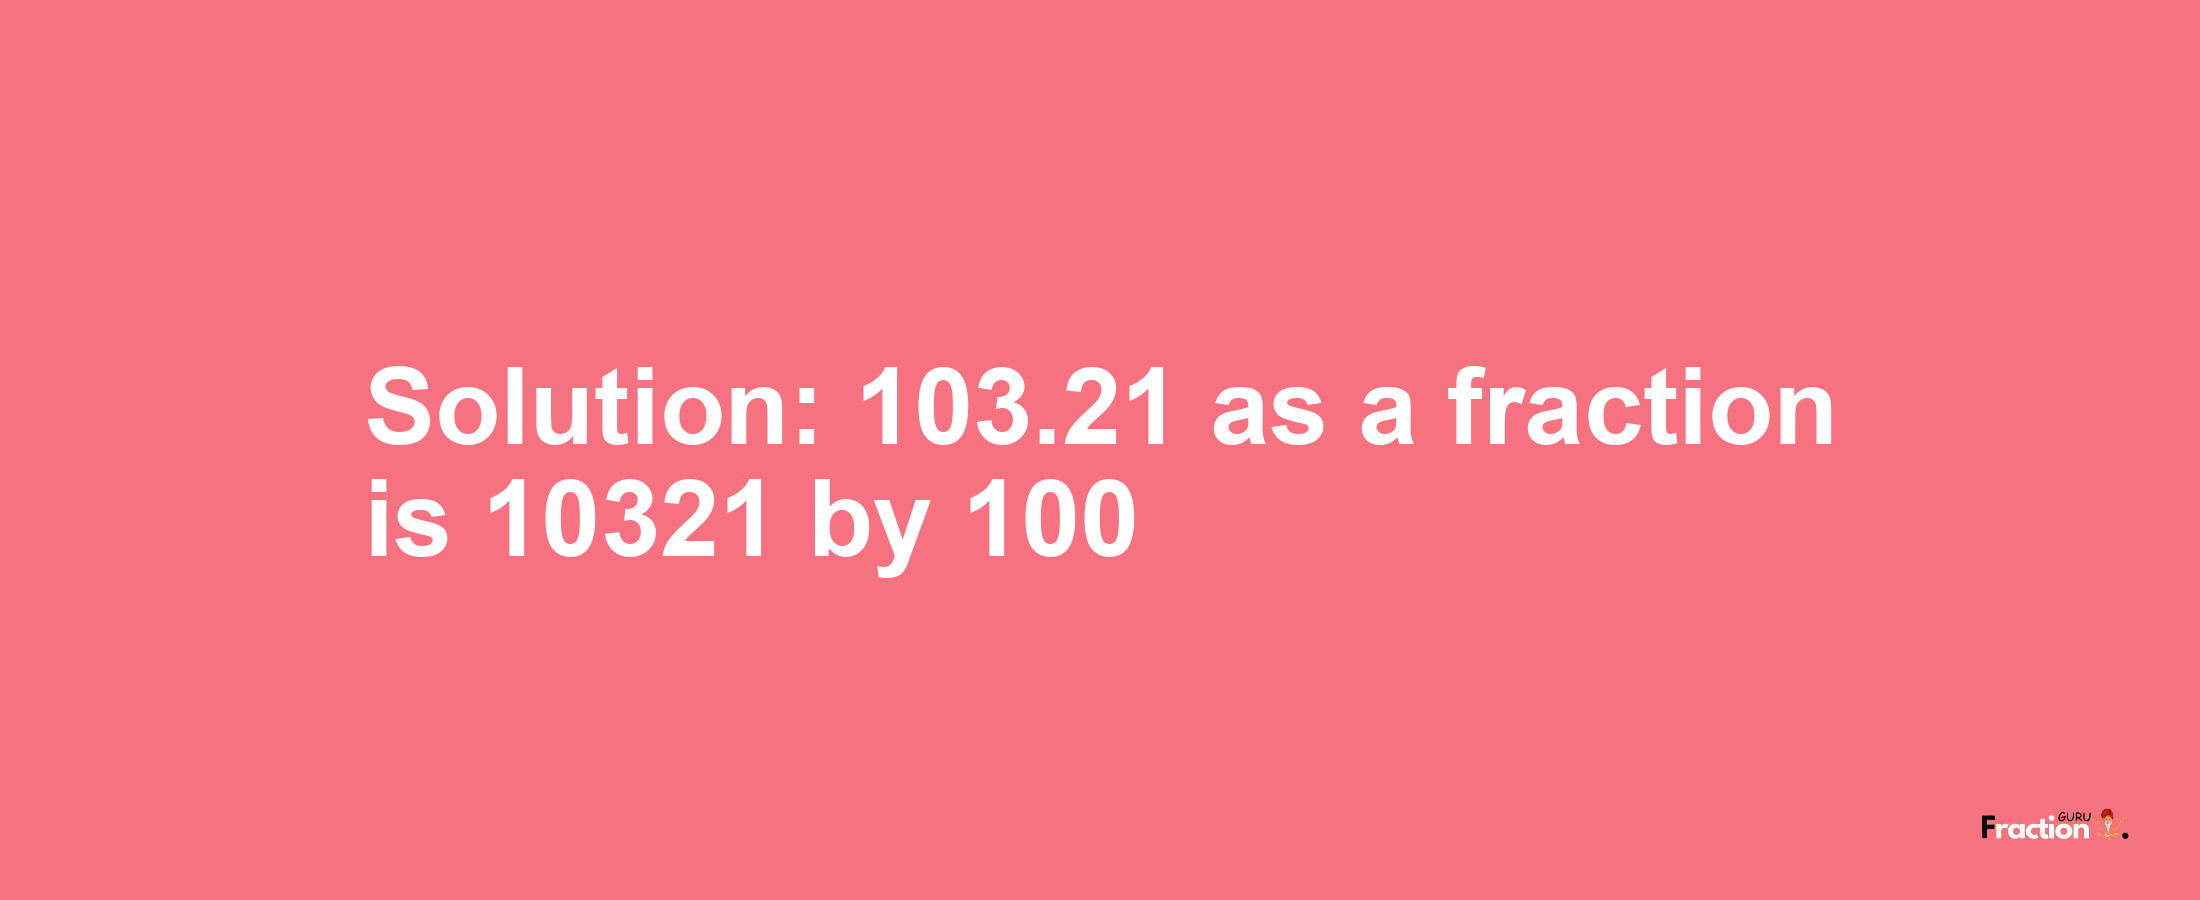 Solution:103.21 as a fraction is 10321/100